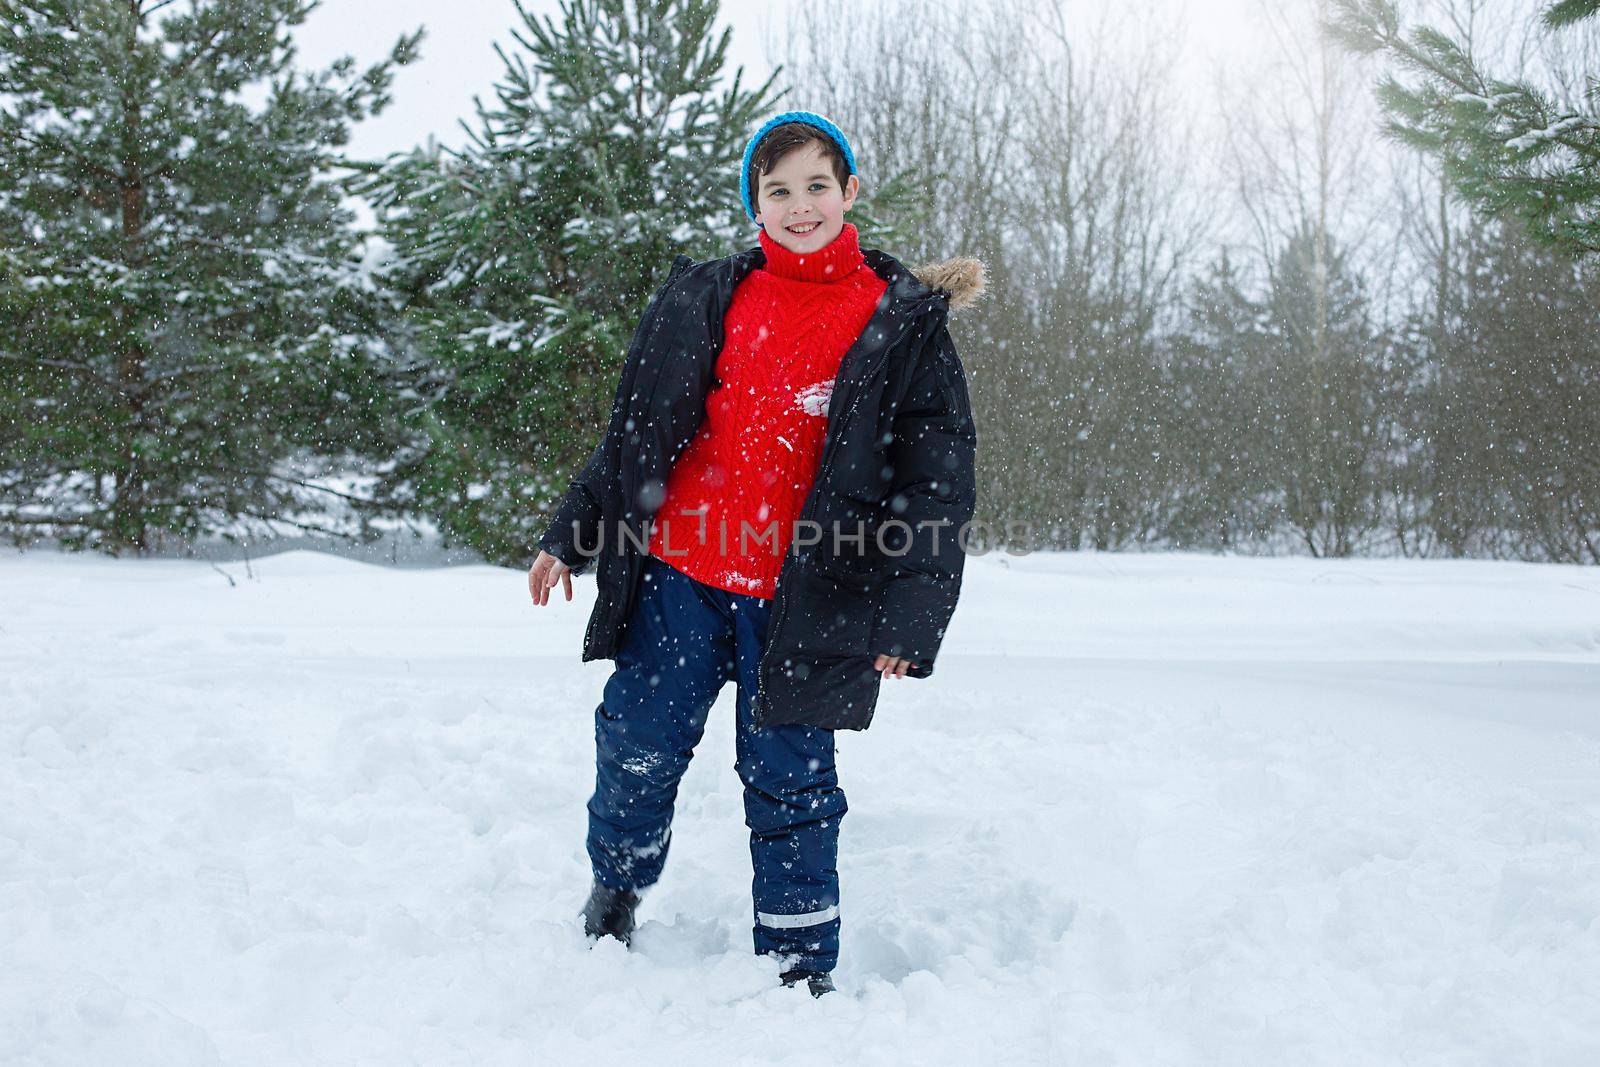 A cute teenager in a dark jacket and a red sweater stands in a winter park on the snow